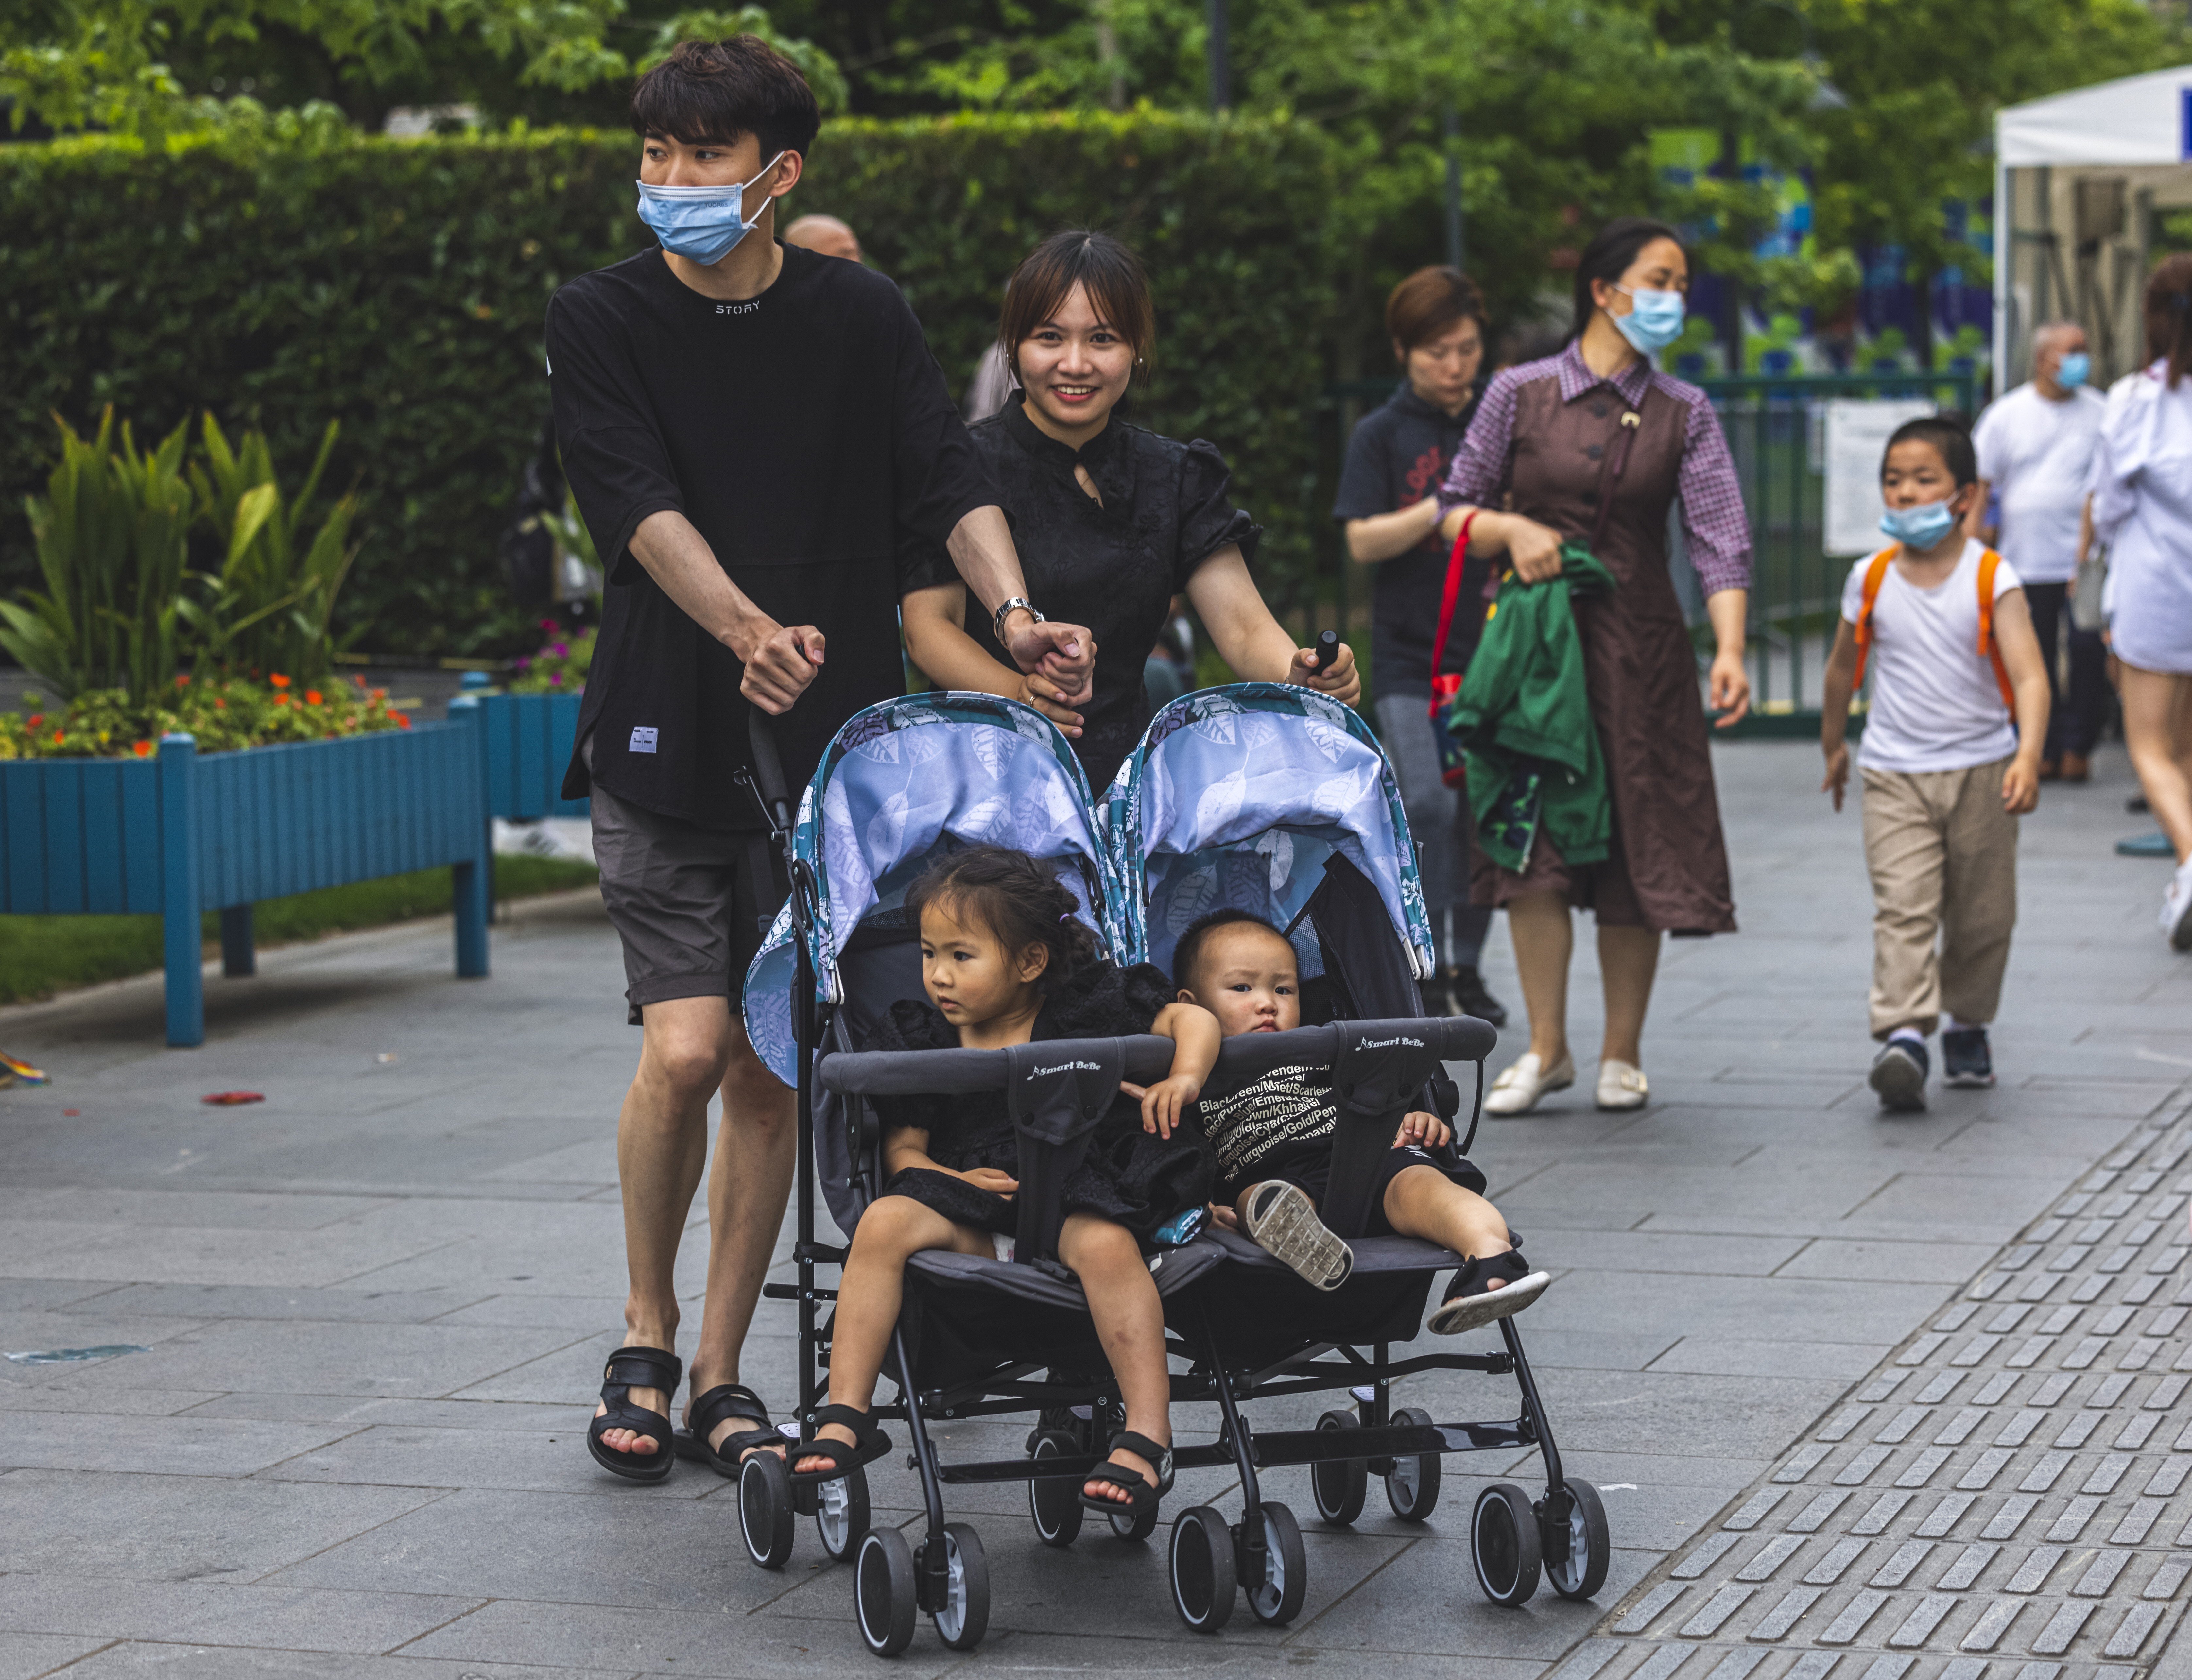 China has scrapped its two-child policy and couples can now have three children. Photo: EPA-EFE